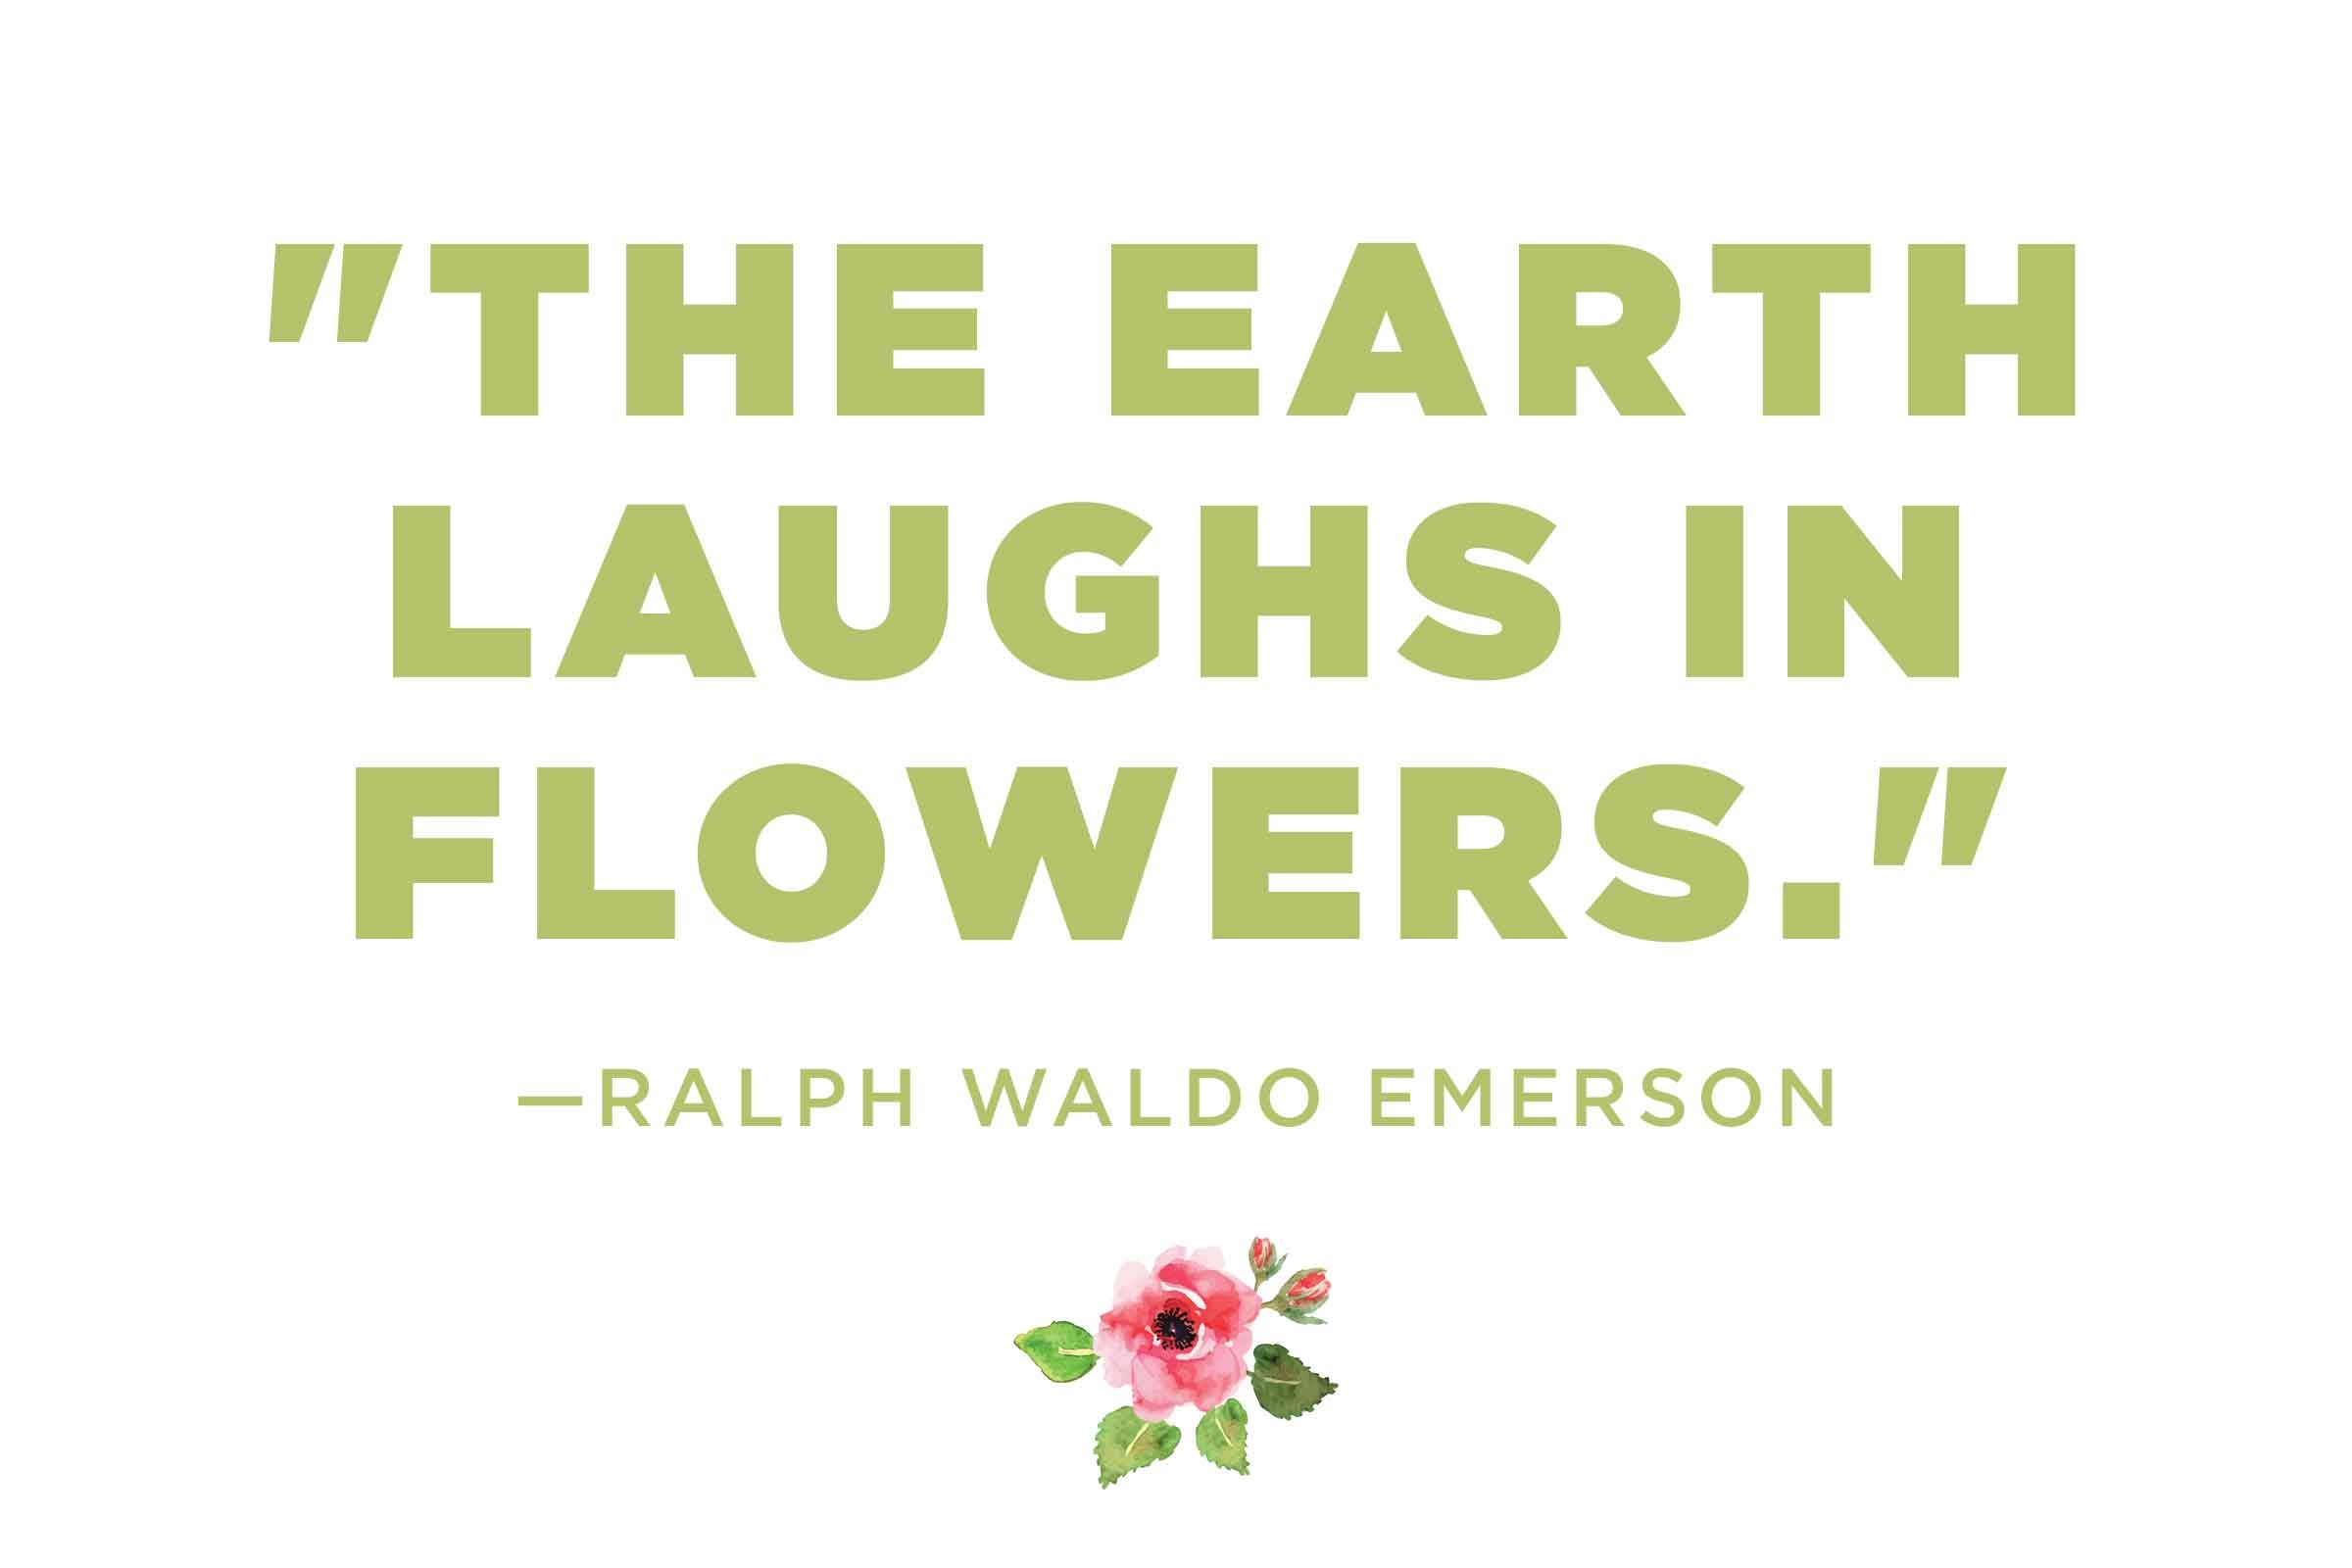 Flower Quotes 12 Calming Thoughts On Flowers Readers Digest